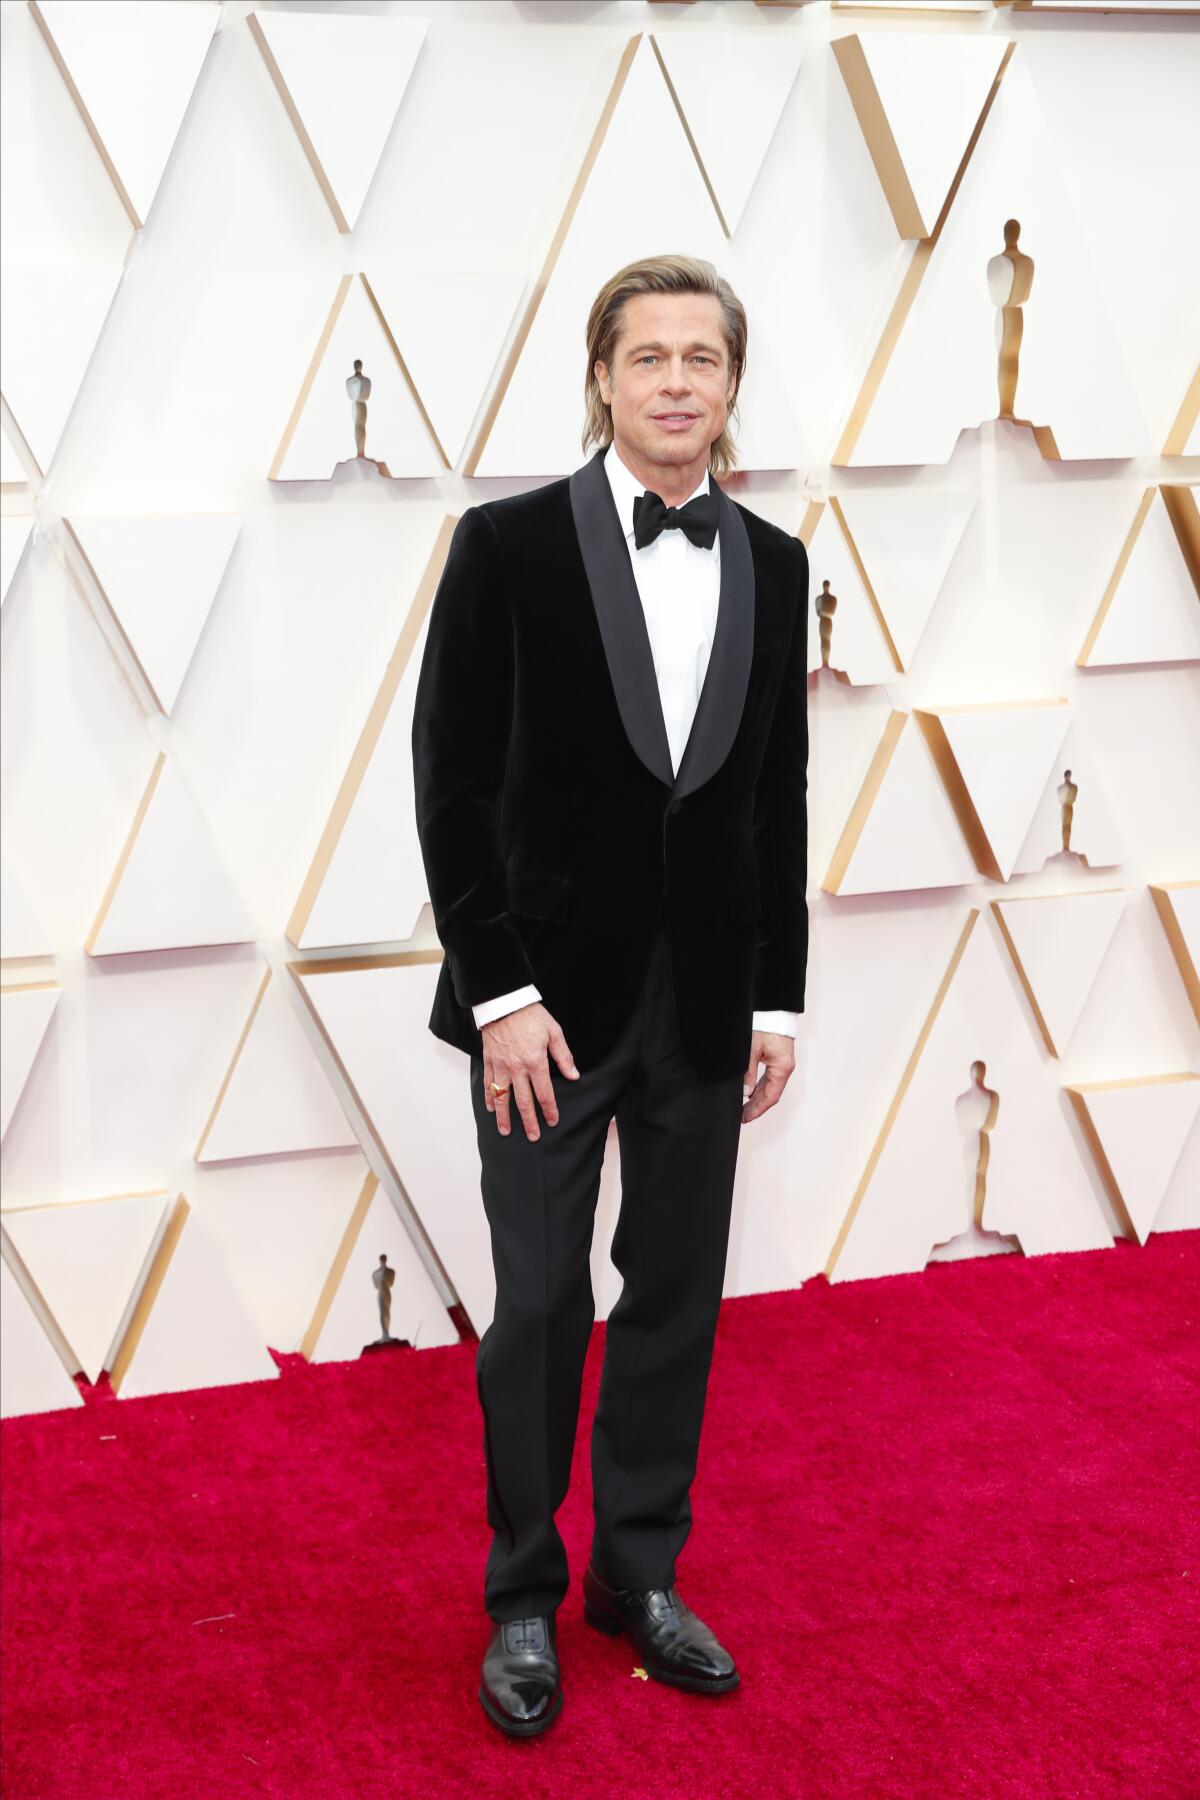 Brad Pitt arrives at the 92nd Academy Awards on Sunday at the Dolby Theatre in Hollywood.

